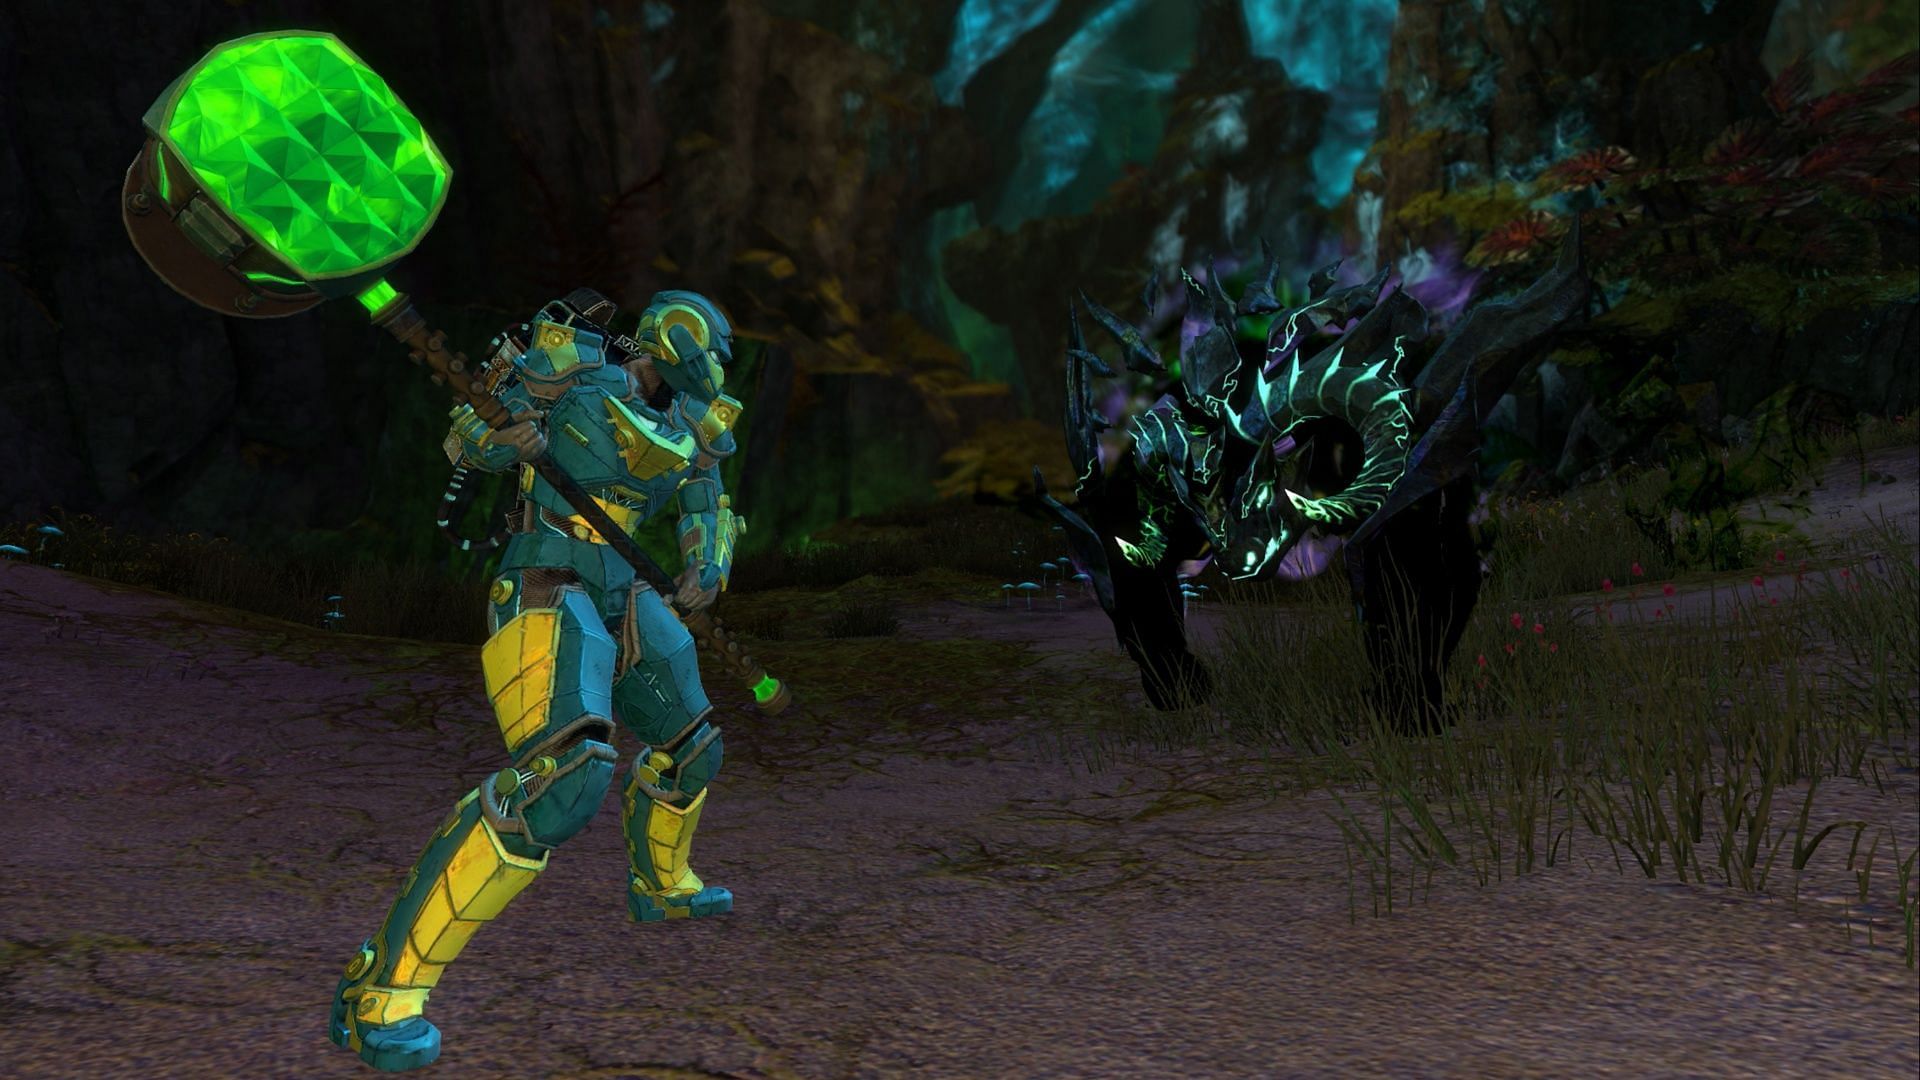 Guild Wars 2 players will have to deal with powerful threats from within in this update (Image via ArenaNet)